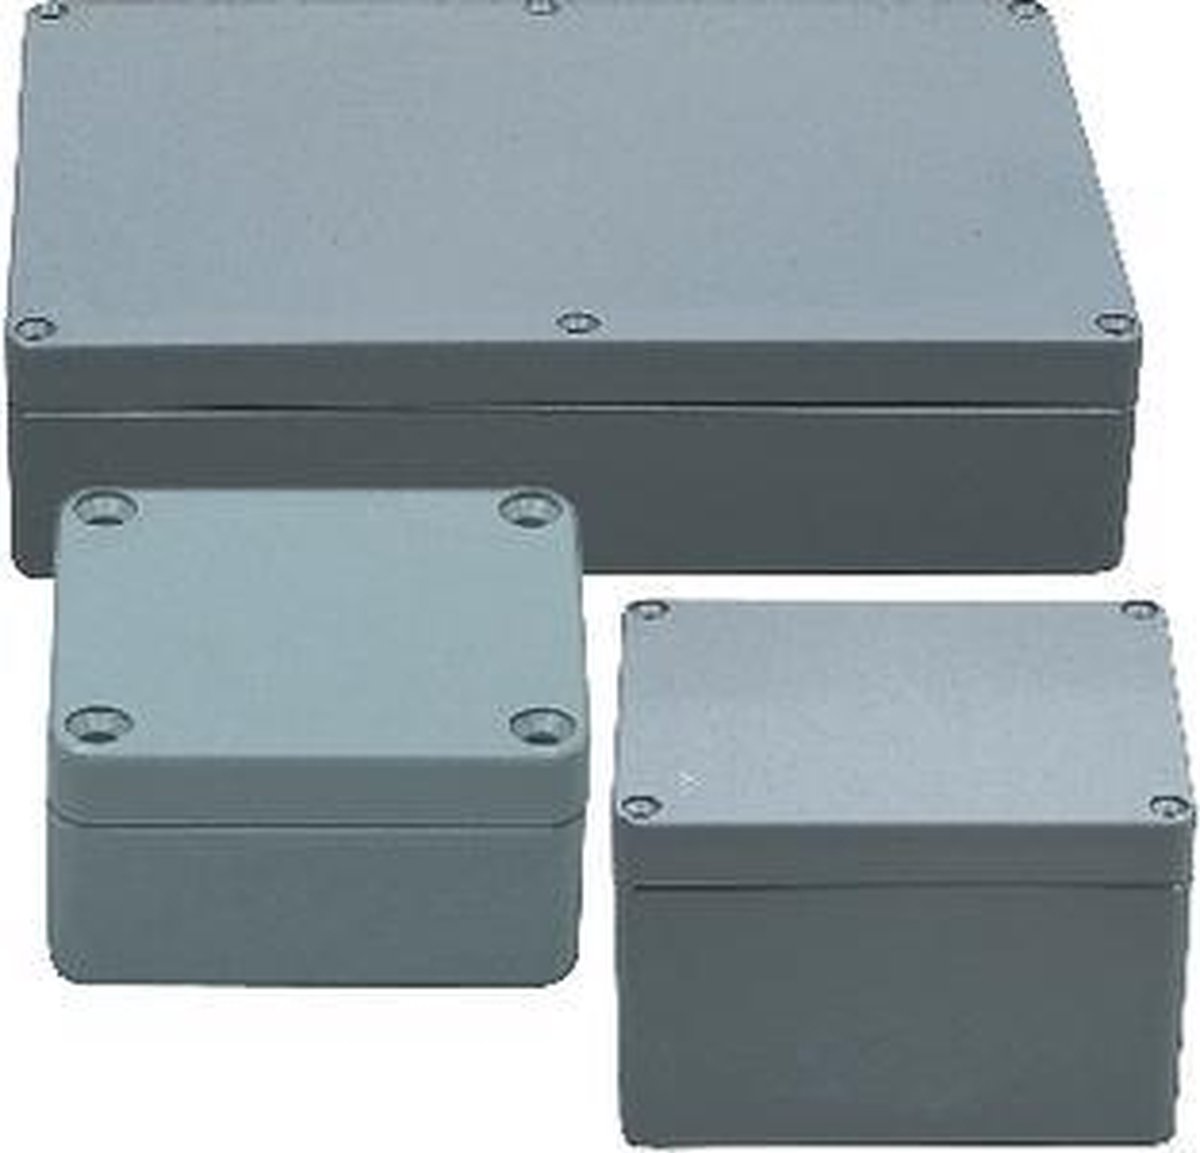 Electrical Enclosure ABS ABS 115 x 65 x 55 mm